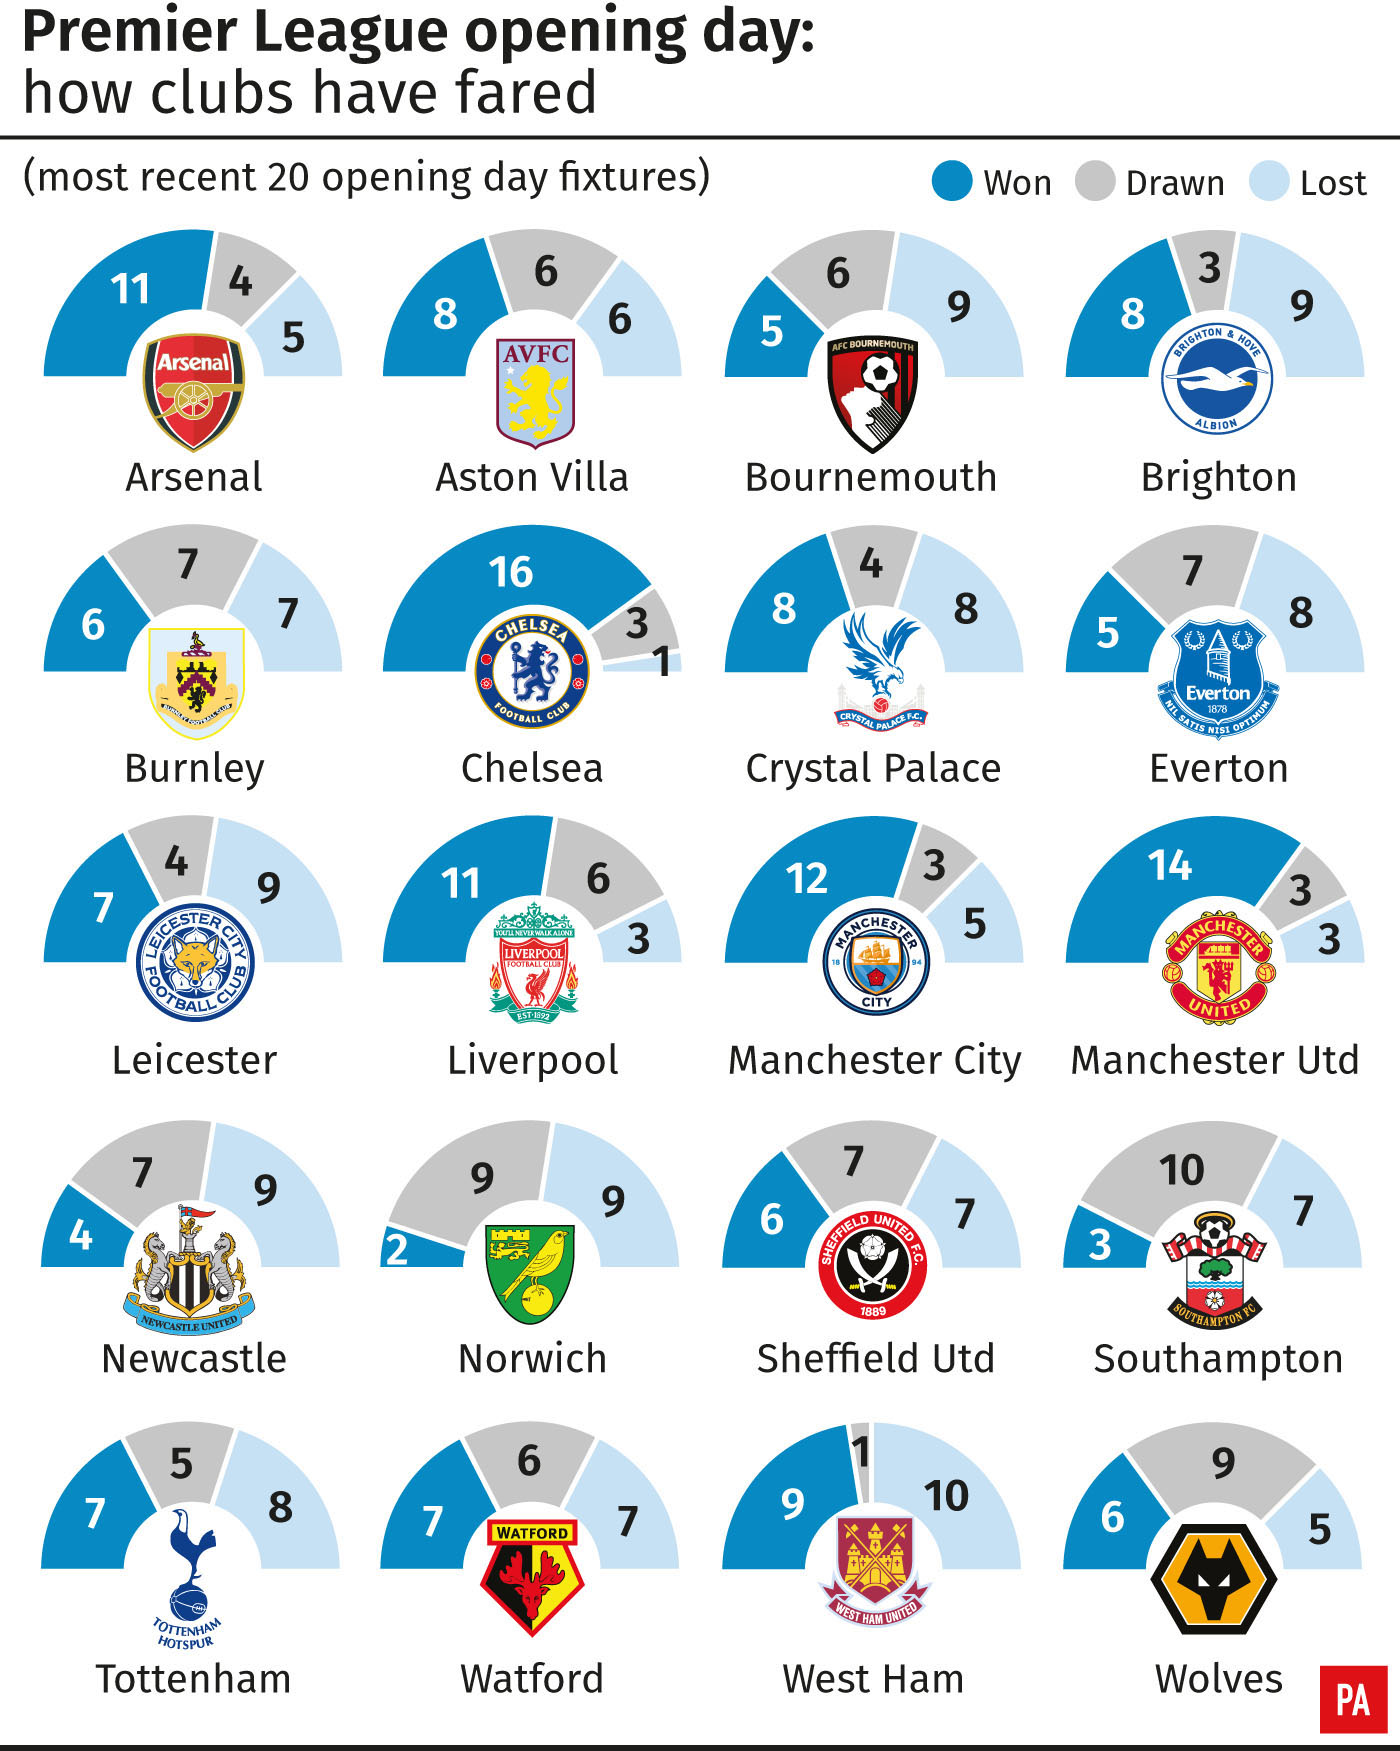 Premier League opening day: how clubs have fared